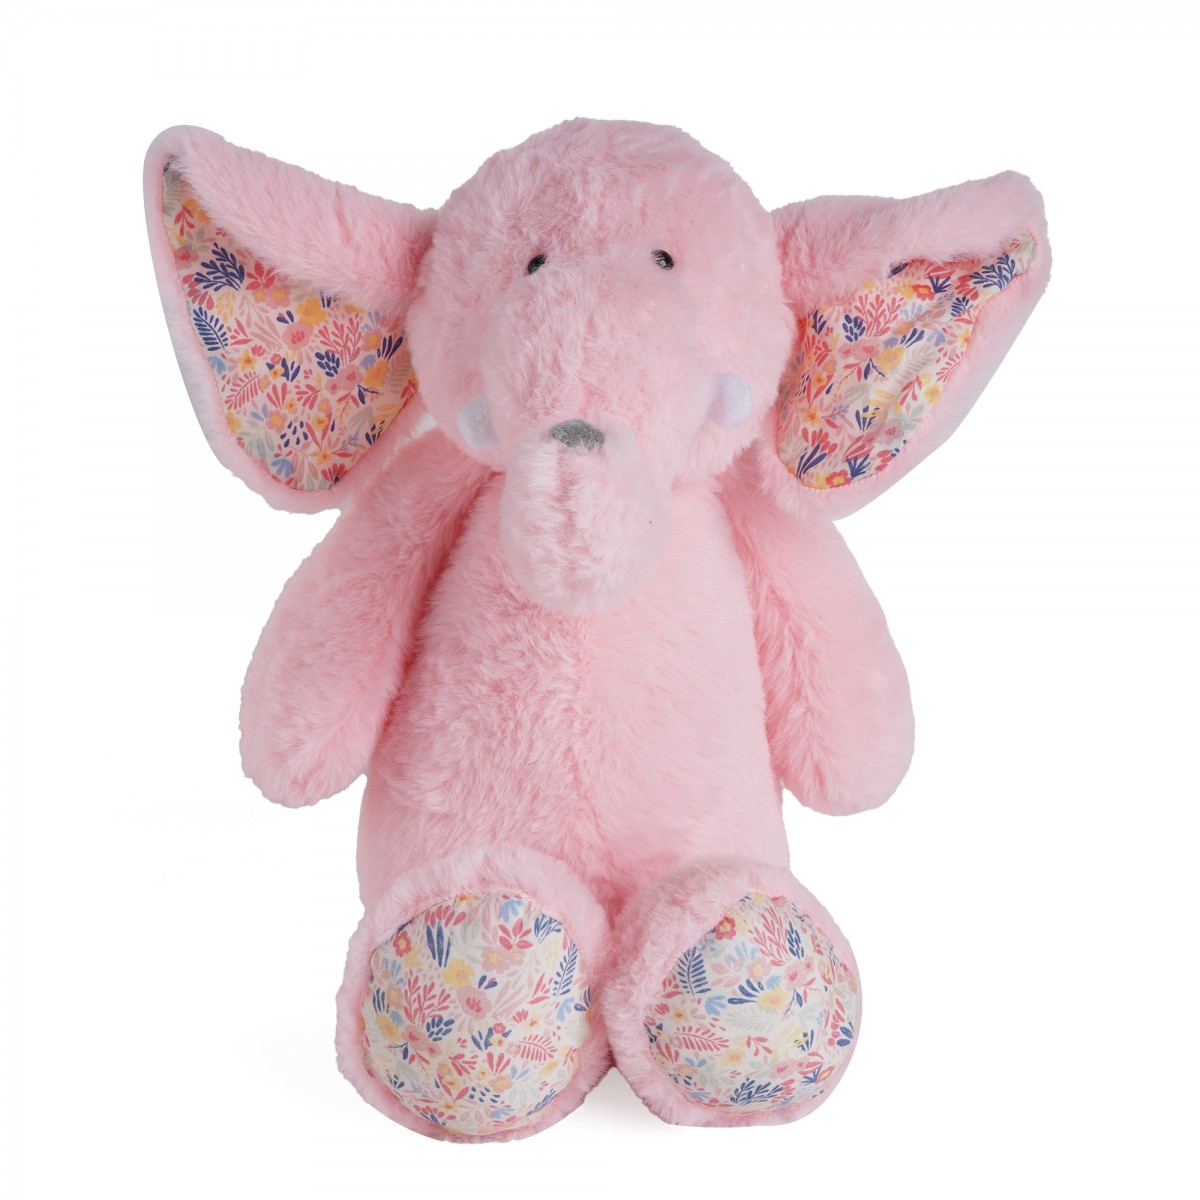 Huggable Cuddly Zany Elephant Stuffed Toy By Fuzzbuzz, Soft Toys for Kids, Cute Plushies Pink, For Kids Of Age 2 Years & Above